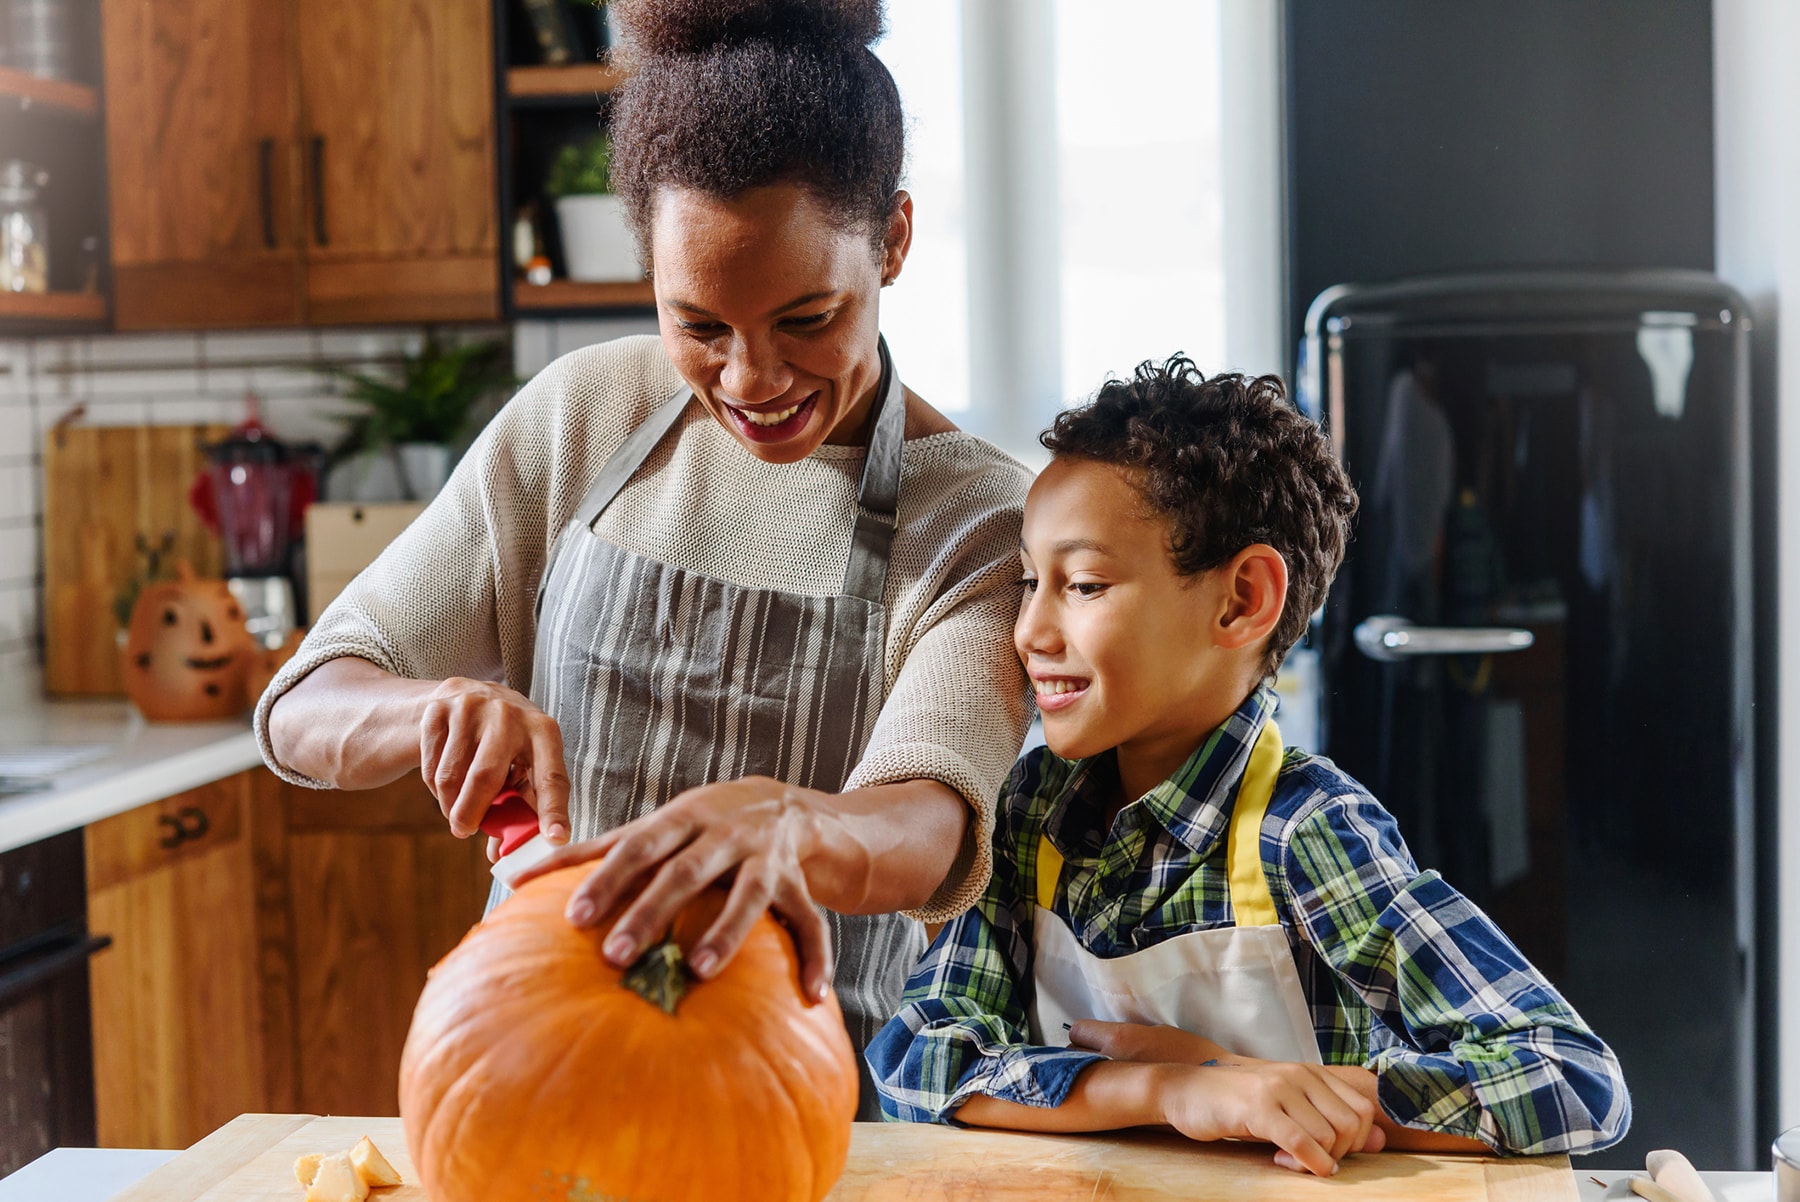 Mother and son carve a pumpkin in the kitchen